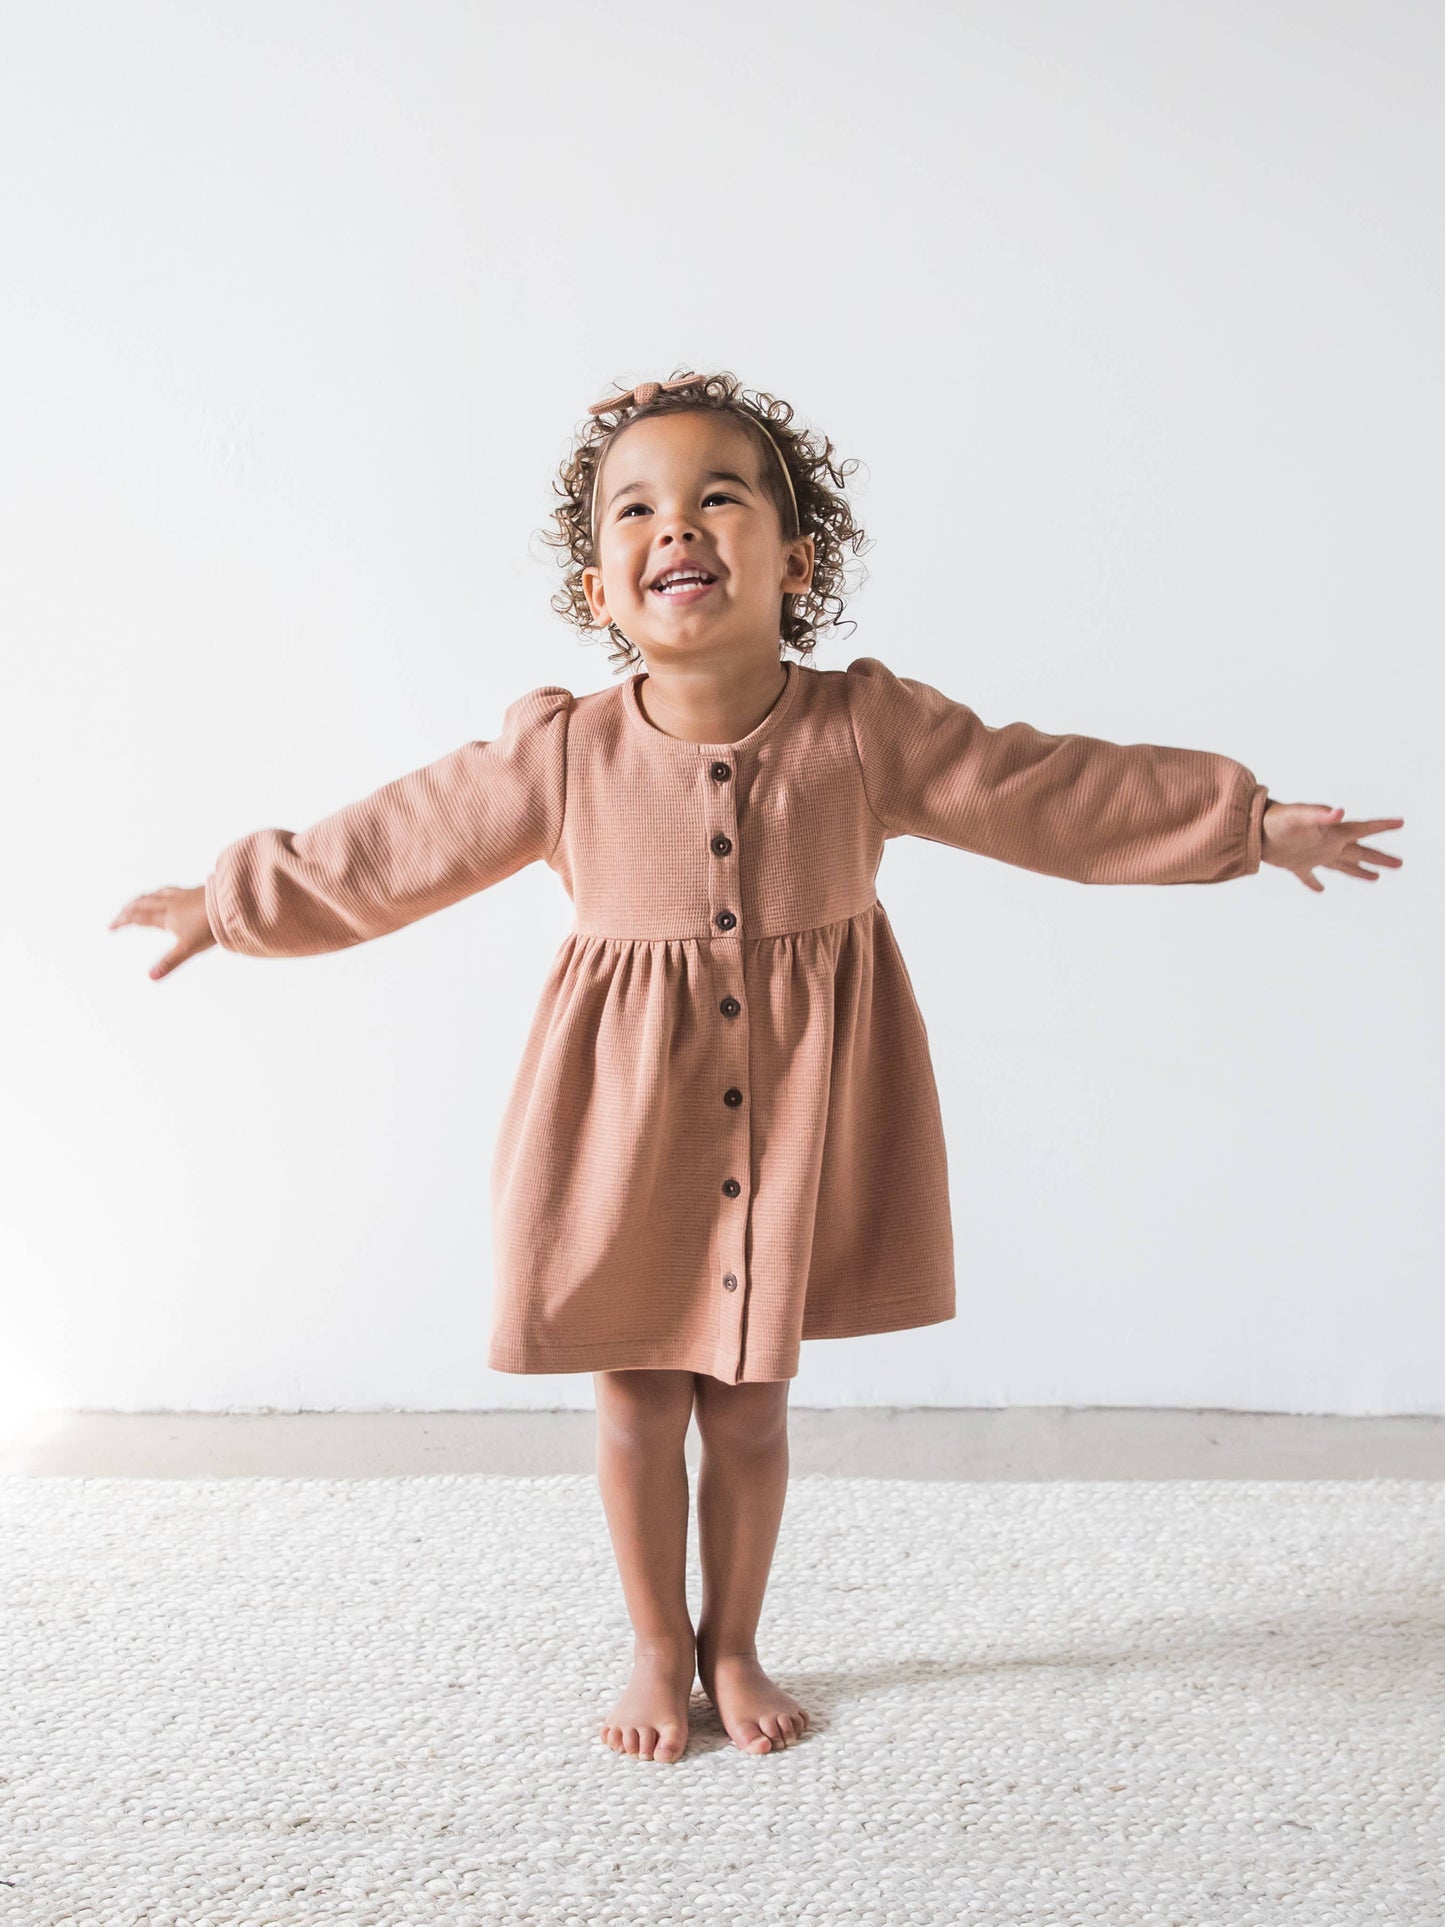 Organic Baby and Kids Elsie Waffle Button Down Dress - Cider